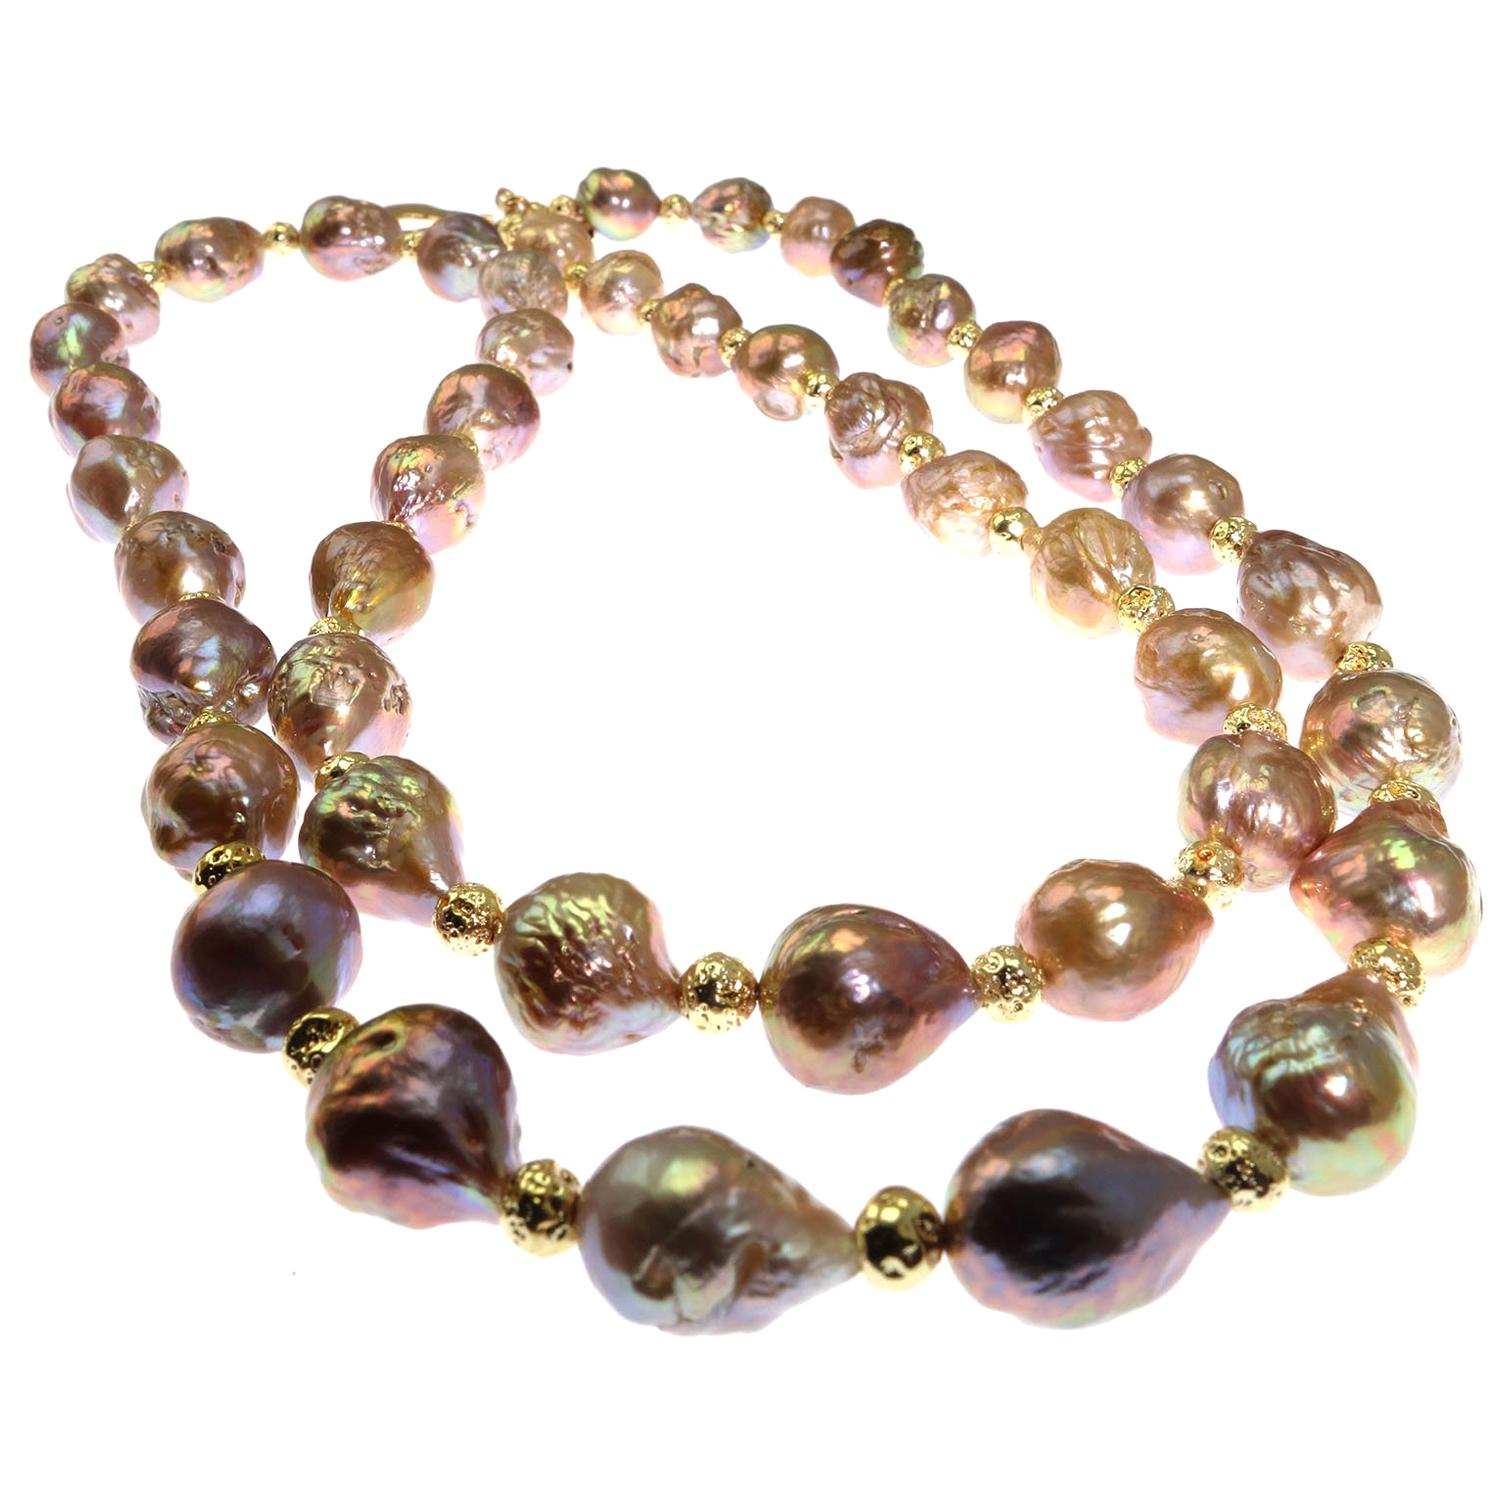 34 Inch Necklace of Natural Golden Freshwater Baroque Pearls